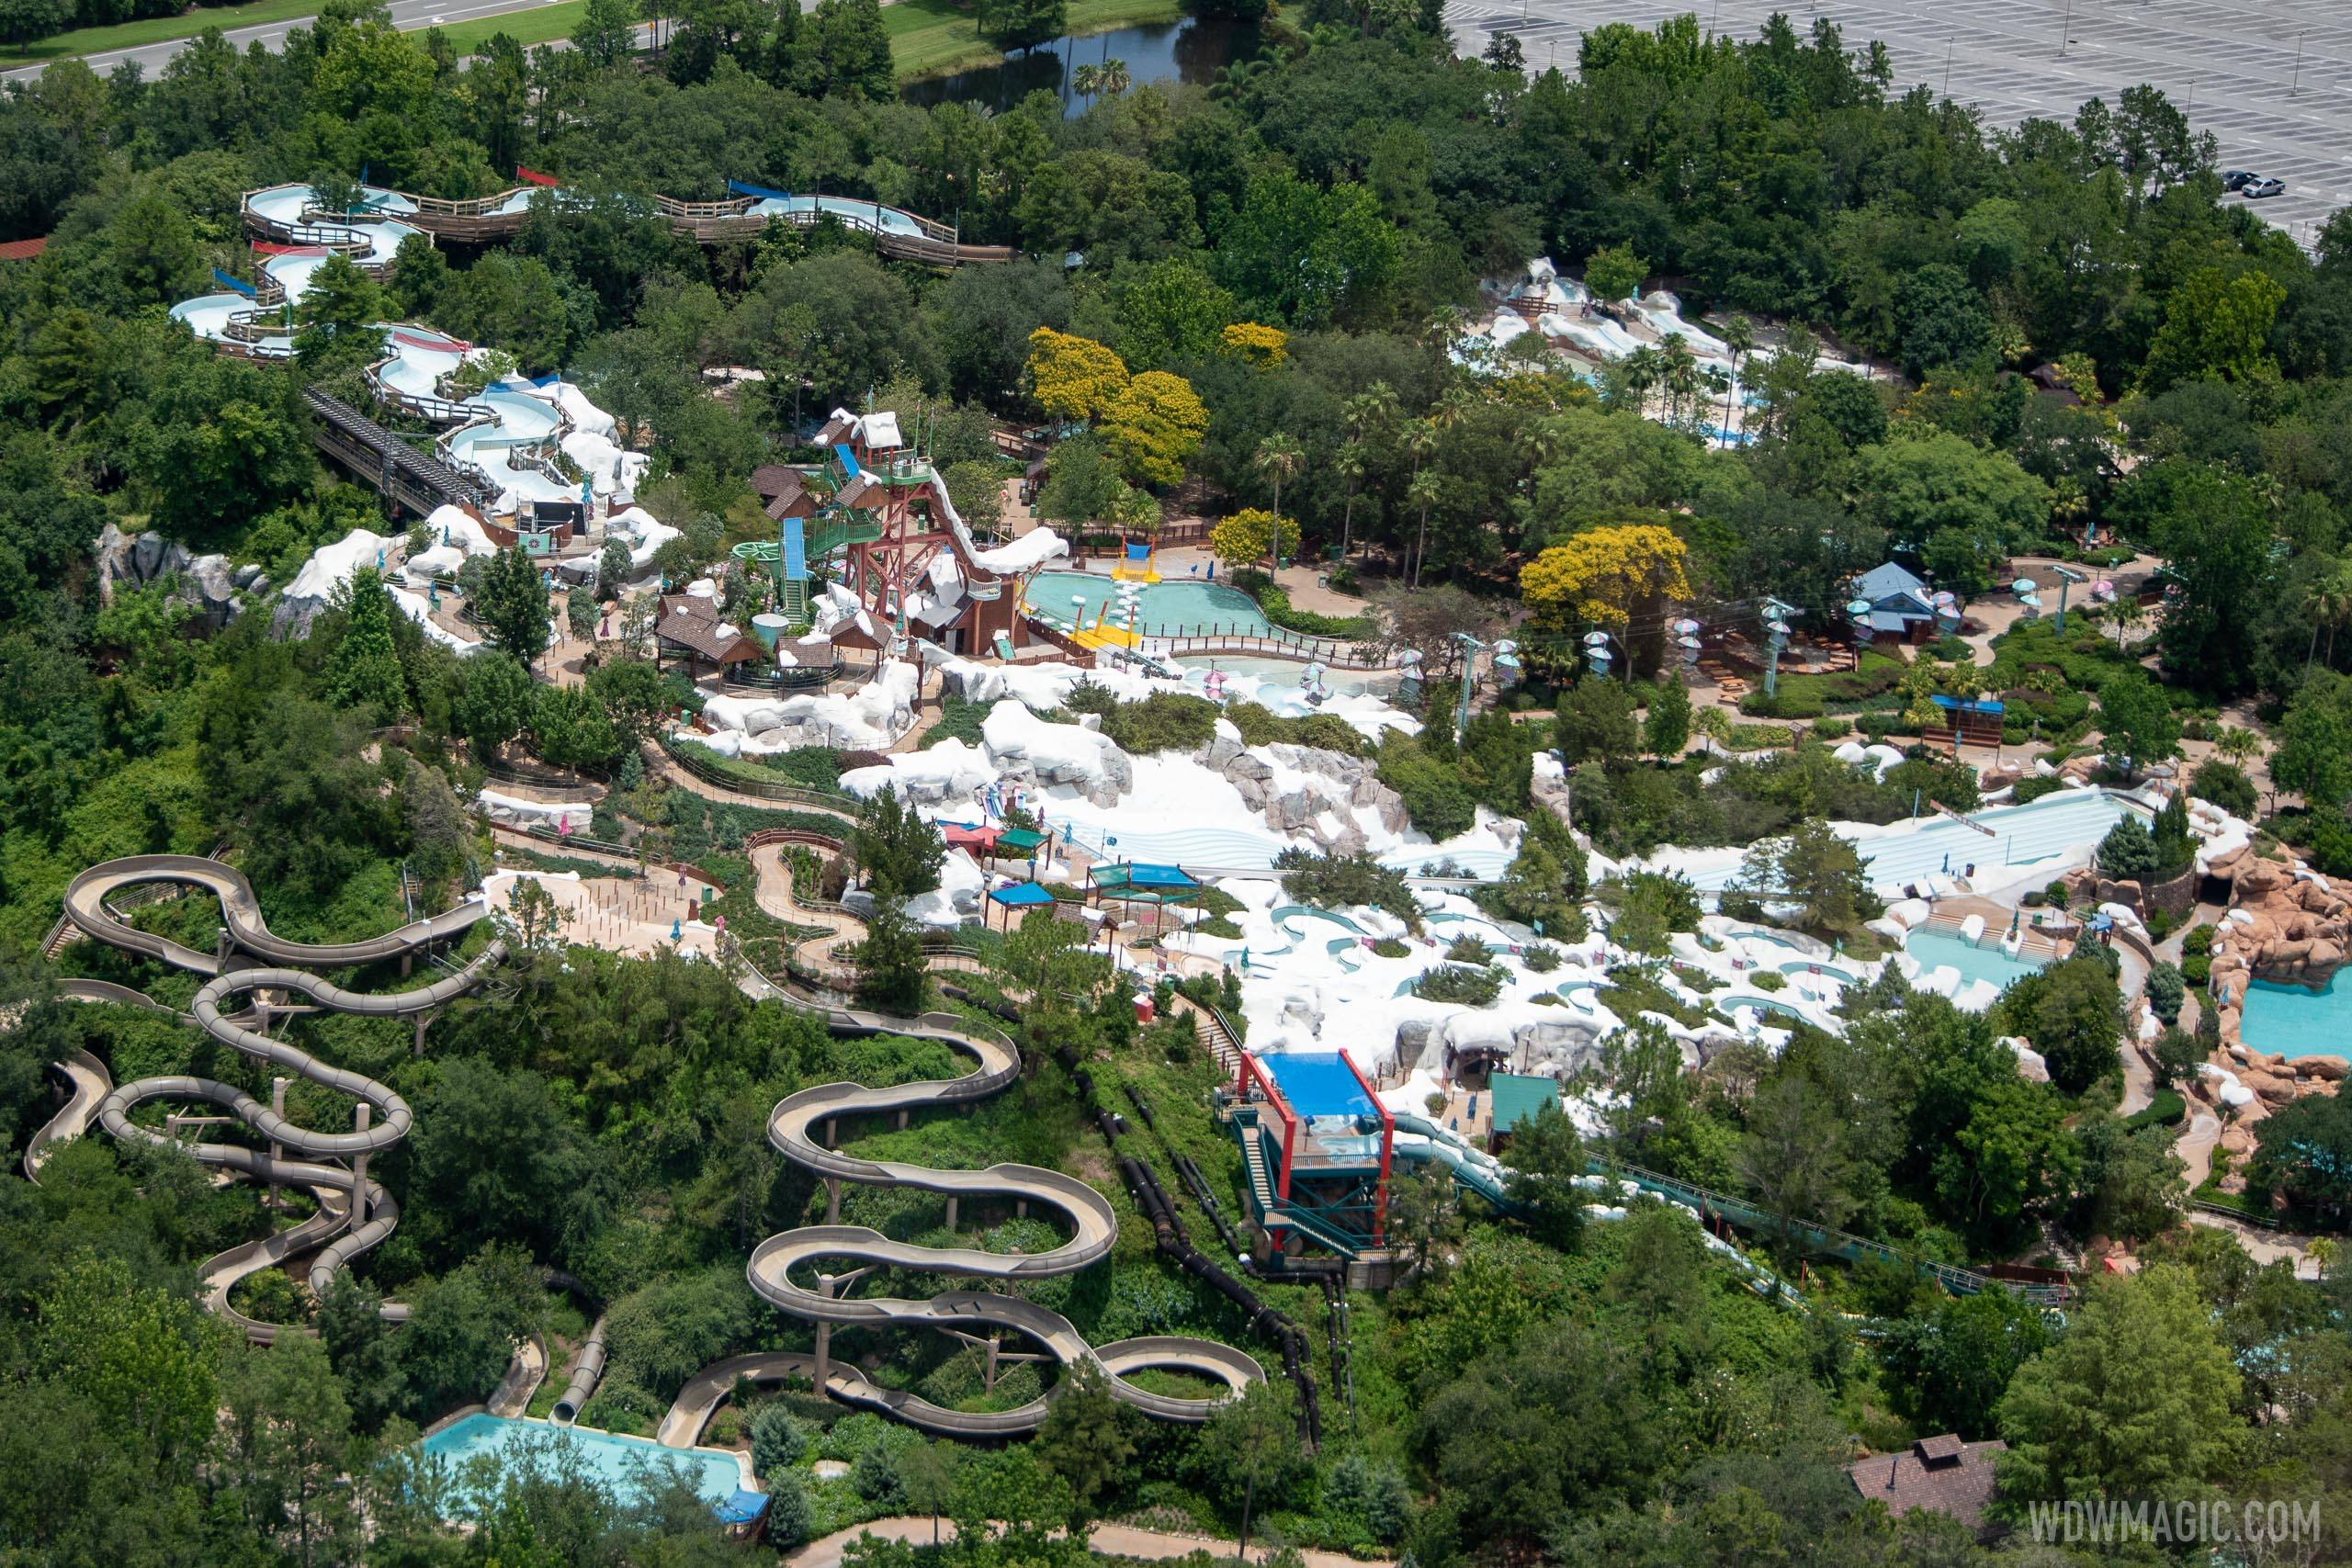 PHOTOS - Aerial views of Blizzard Beach and Typhoon Lagoon as both remain closed